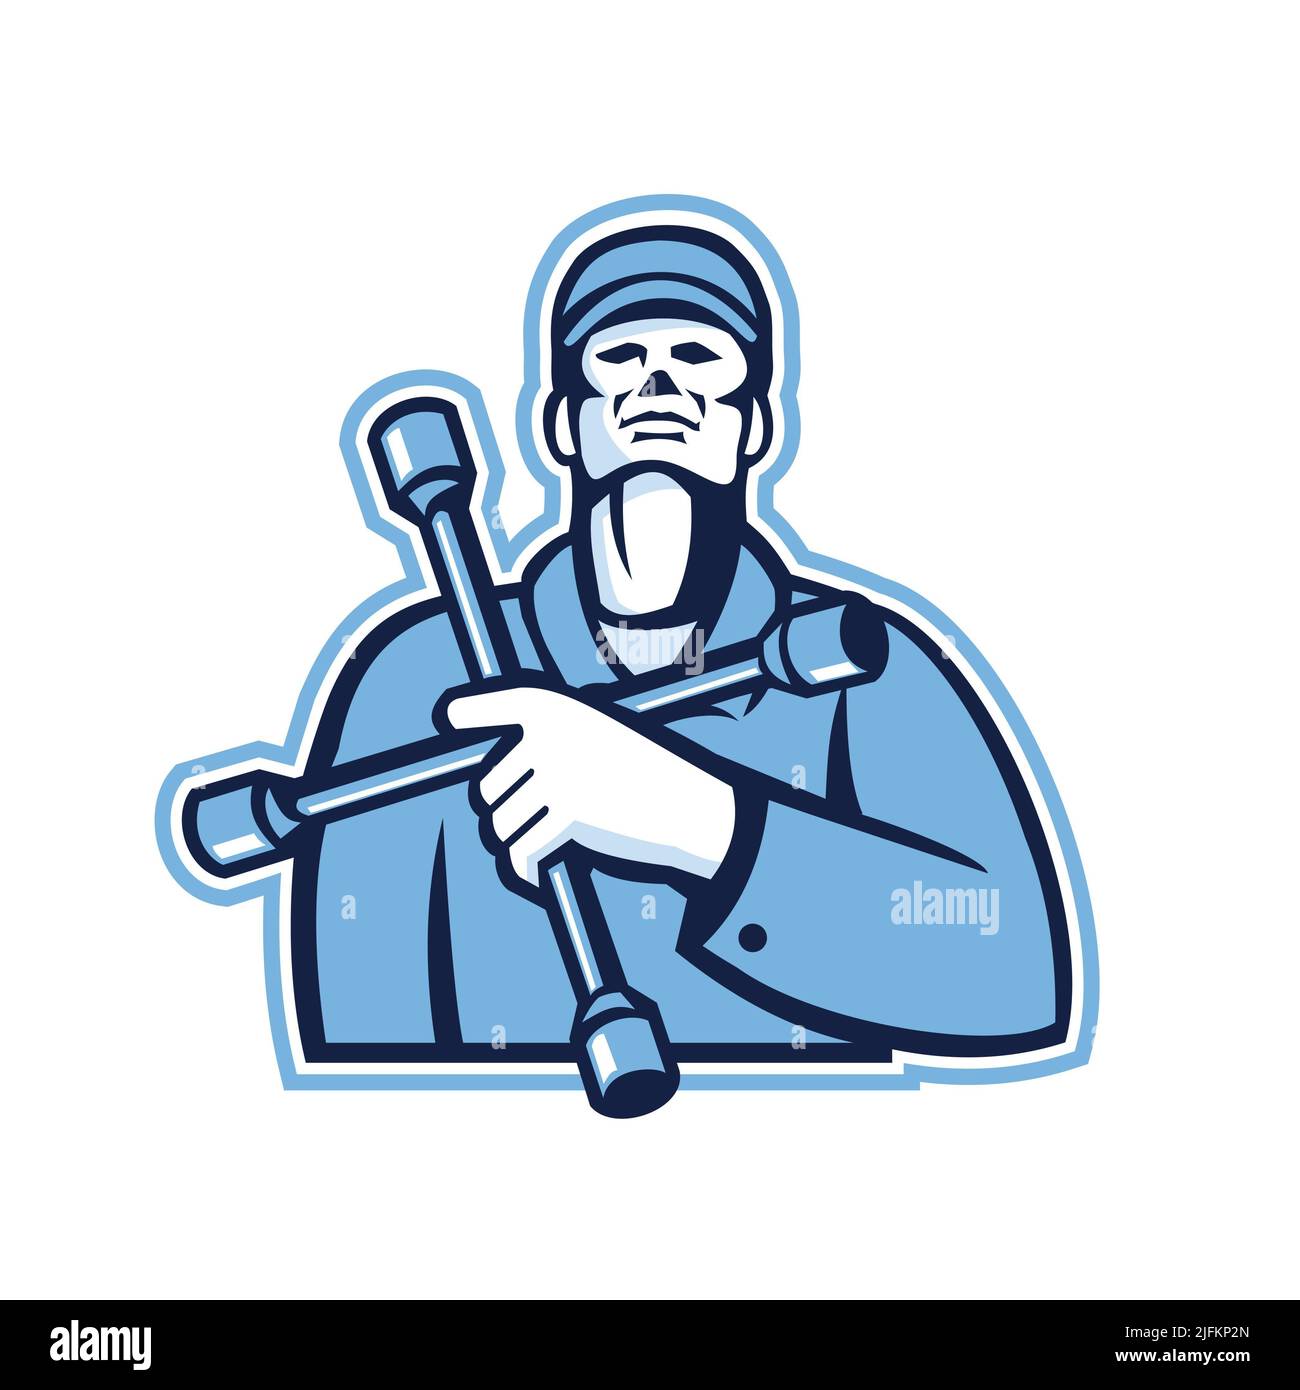 Illustration of a tire technician or mechanic holding tire wrench, 4-way lug wrench or tyre iron on chest looking up viewed from front on isolated Stock Photo